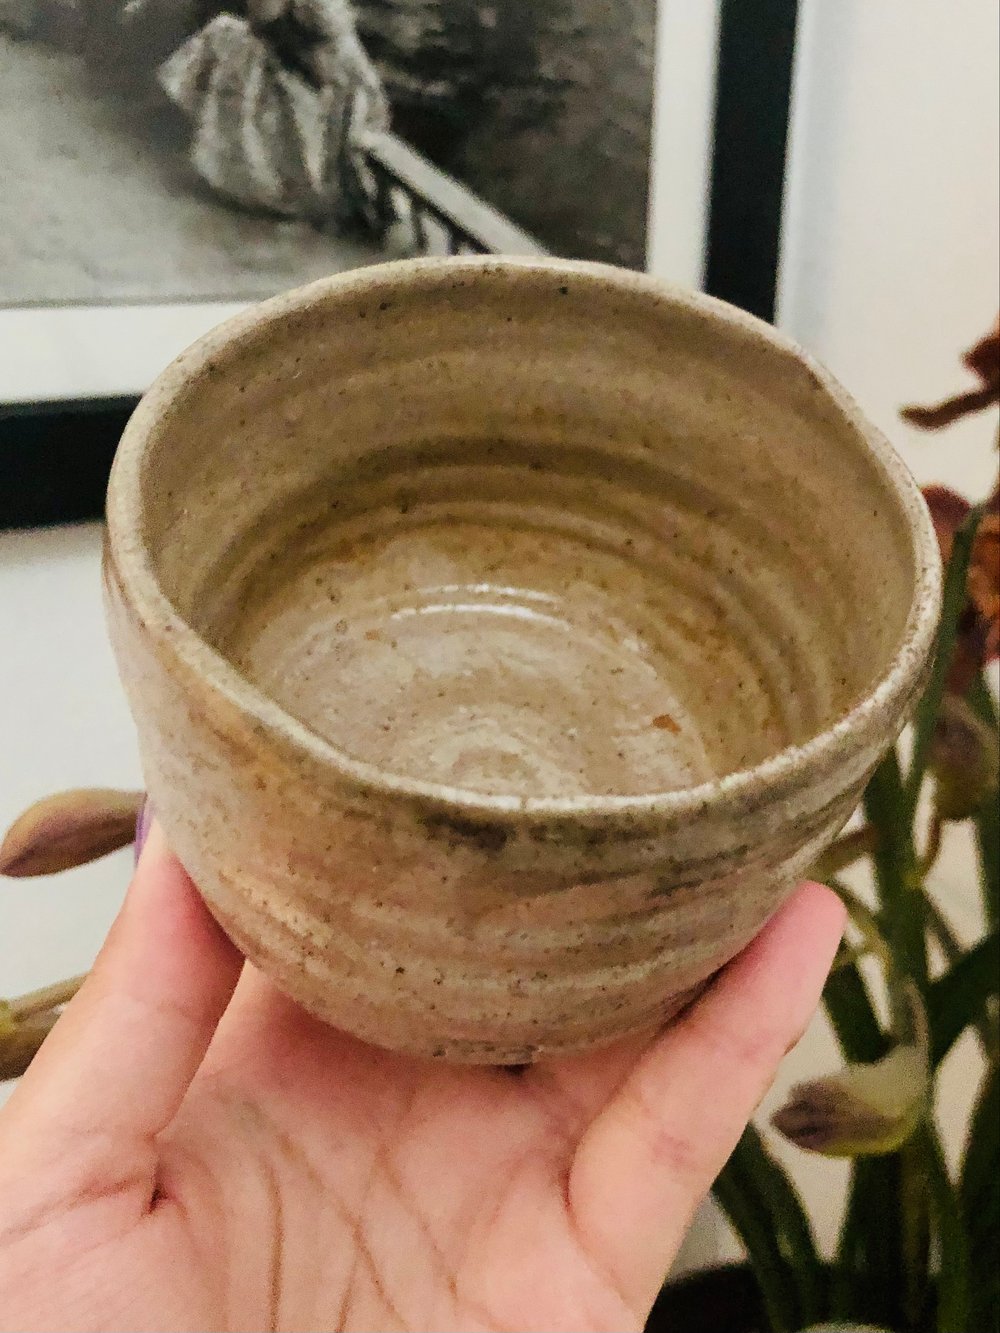 Image of Grey Salt Fired Cup